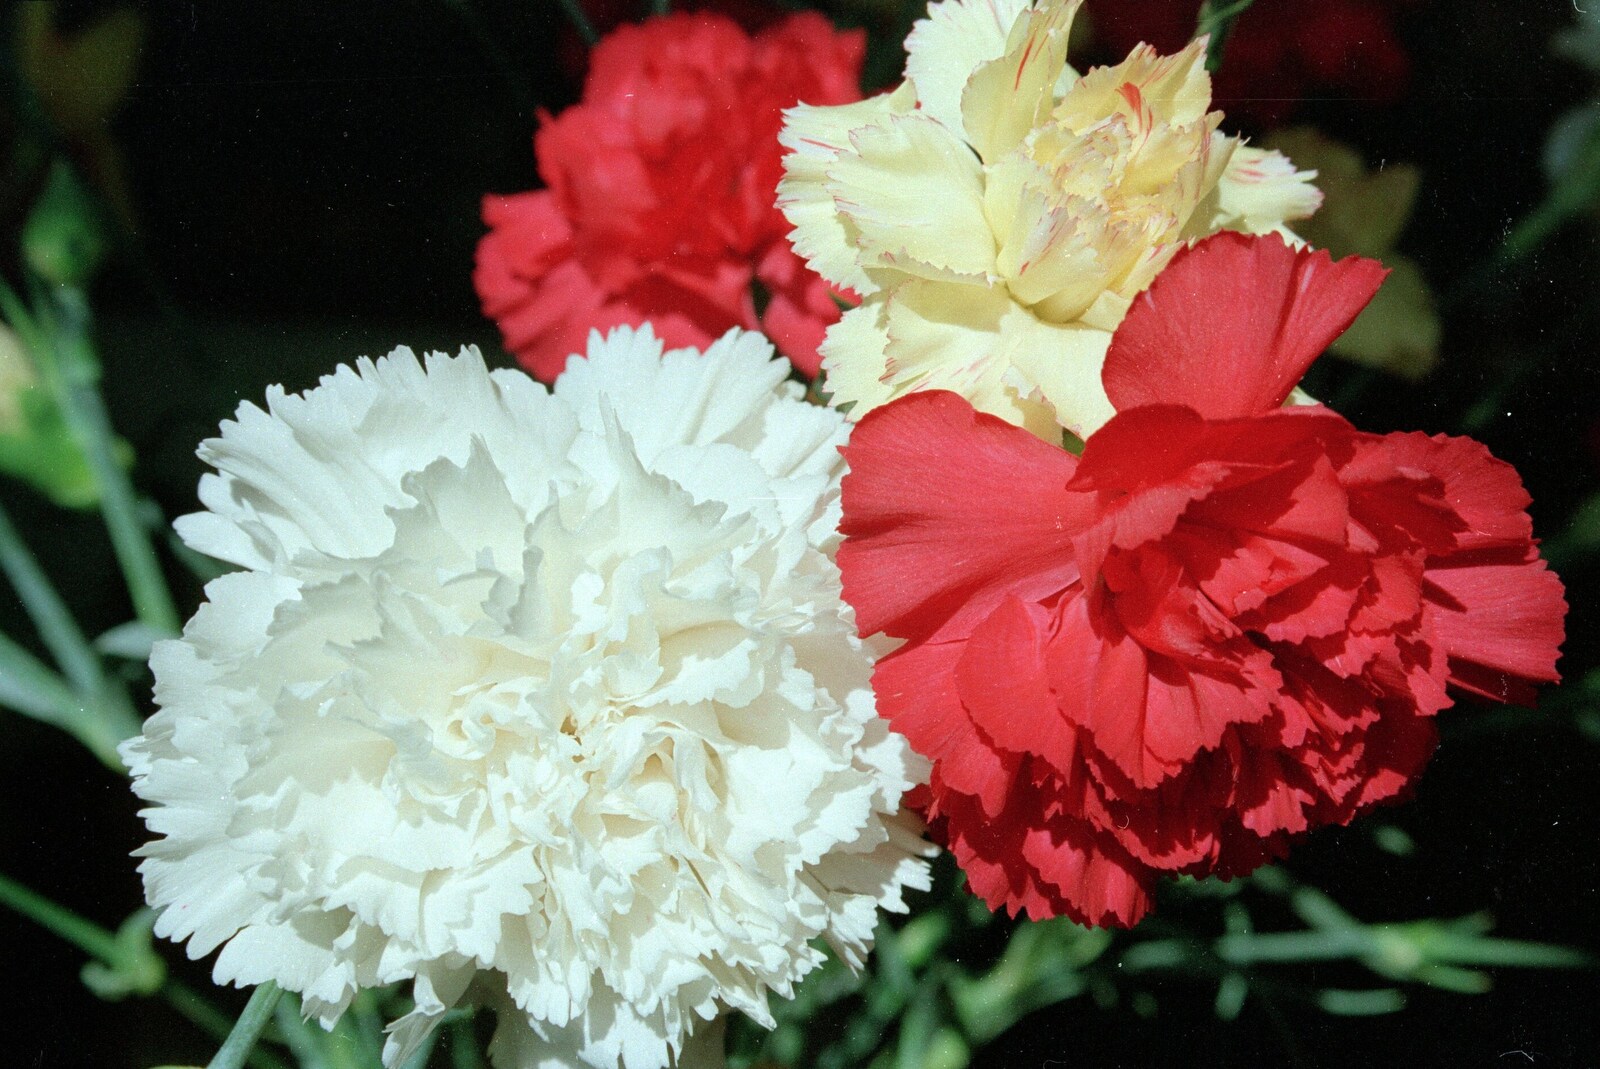 A bunch of carnations from Mother's 40th, Burton, Christchurch, Dorset - 18th April 1987